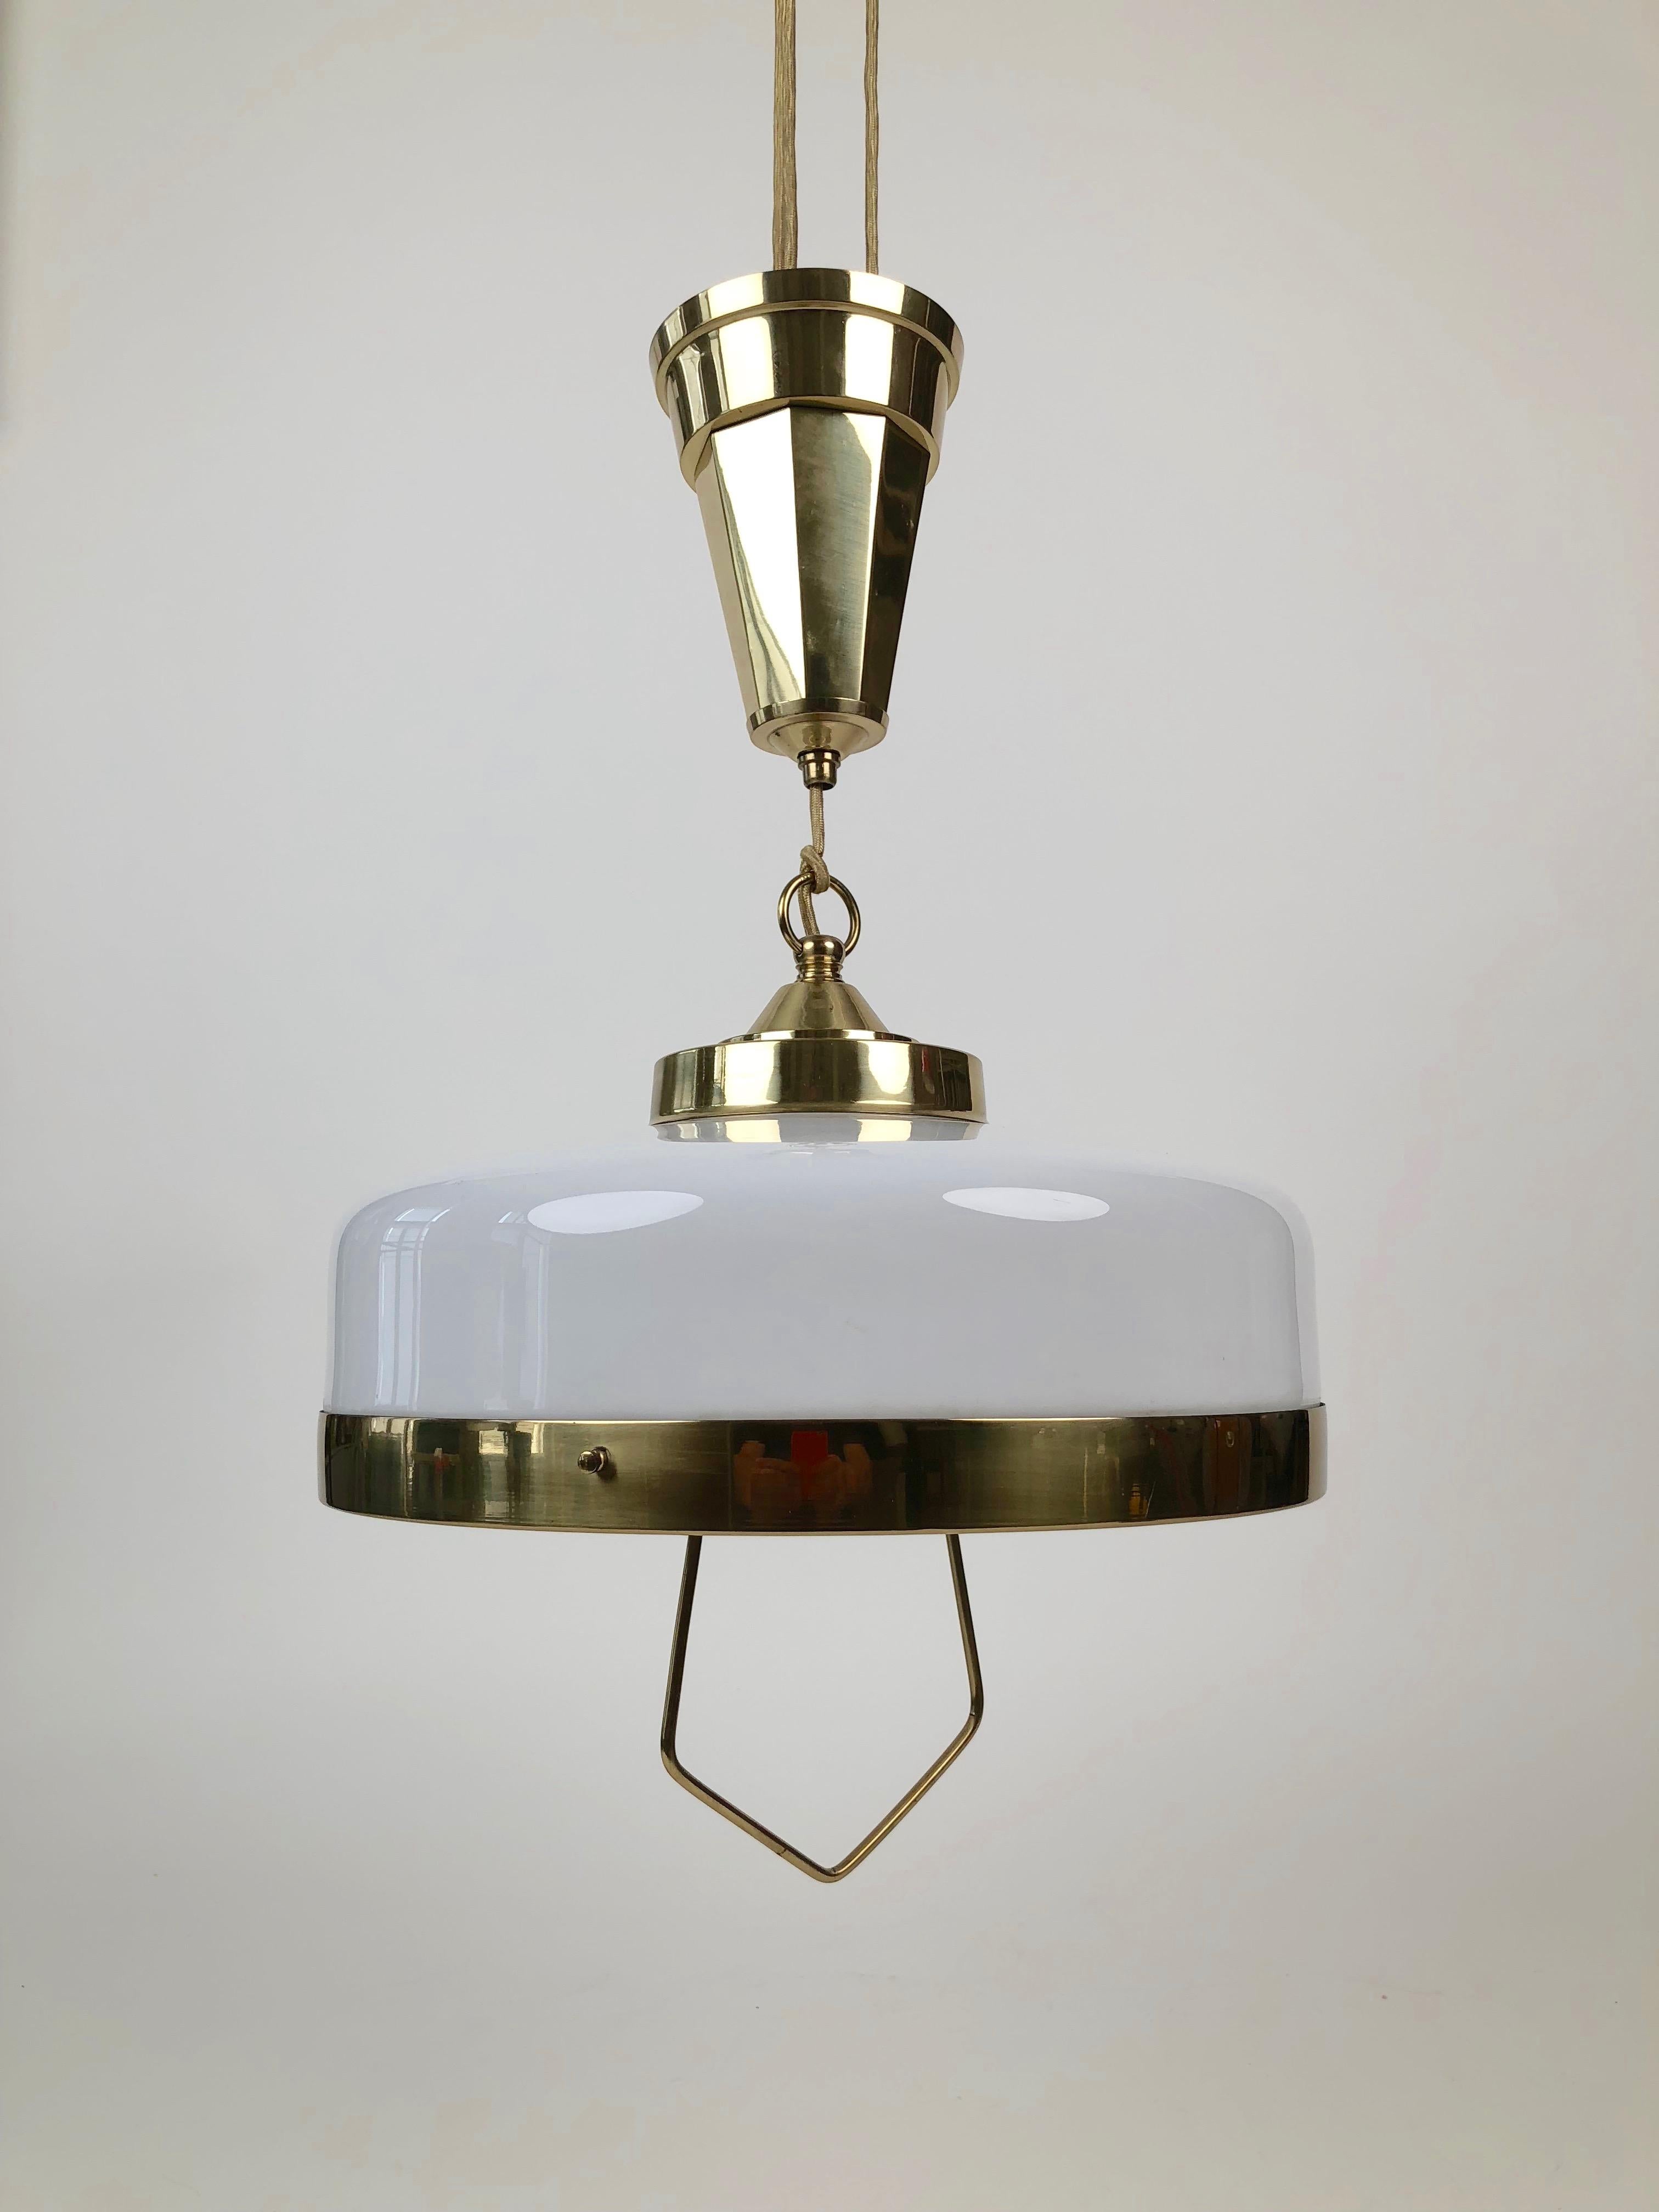 Adjustable jugendstil chandelier with white opaline glass. It was produced in Austria, circa 1923. The electrical wiring was replaced in the
late 1990s. It comes with the original wooden ceiling cup that goes between the ceiling and brass cup. This